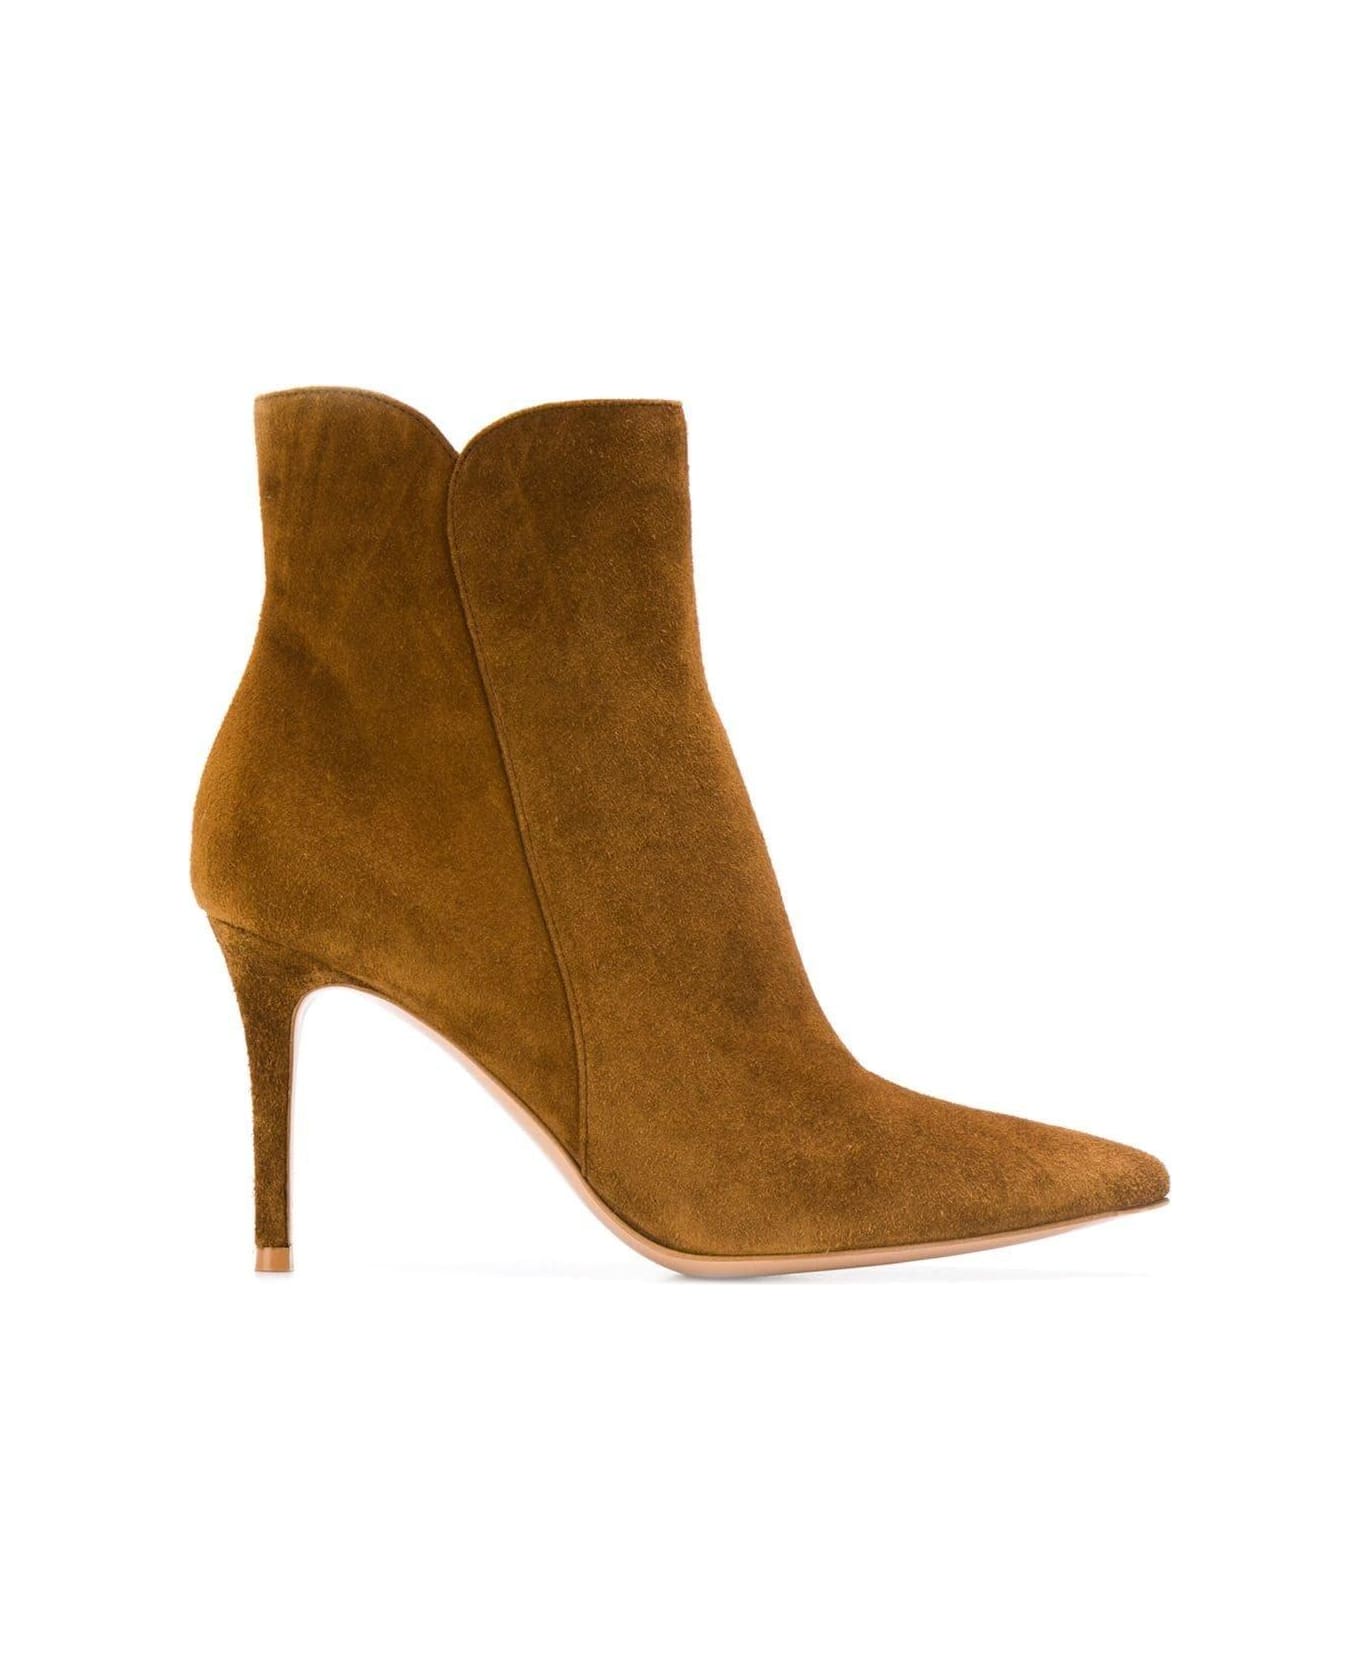 Gianvito Rossi Levy Ankle Boots